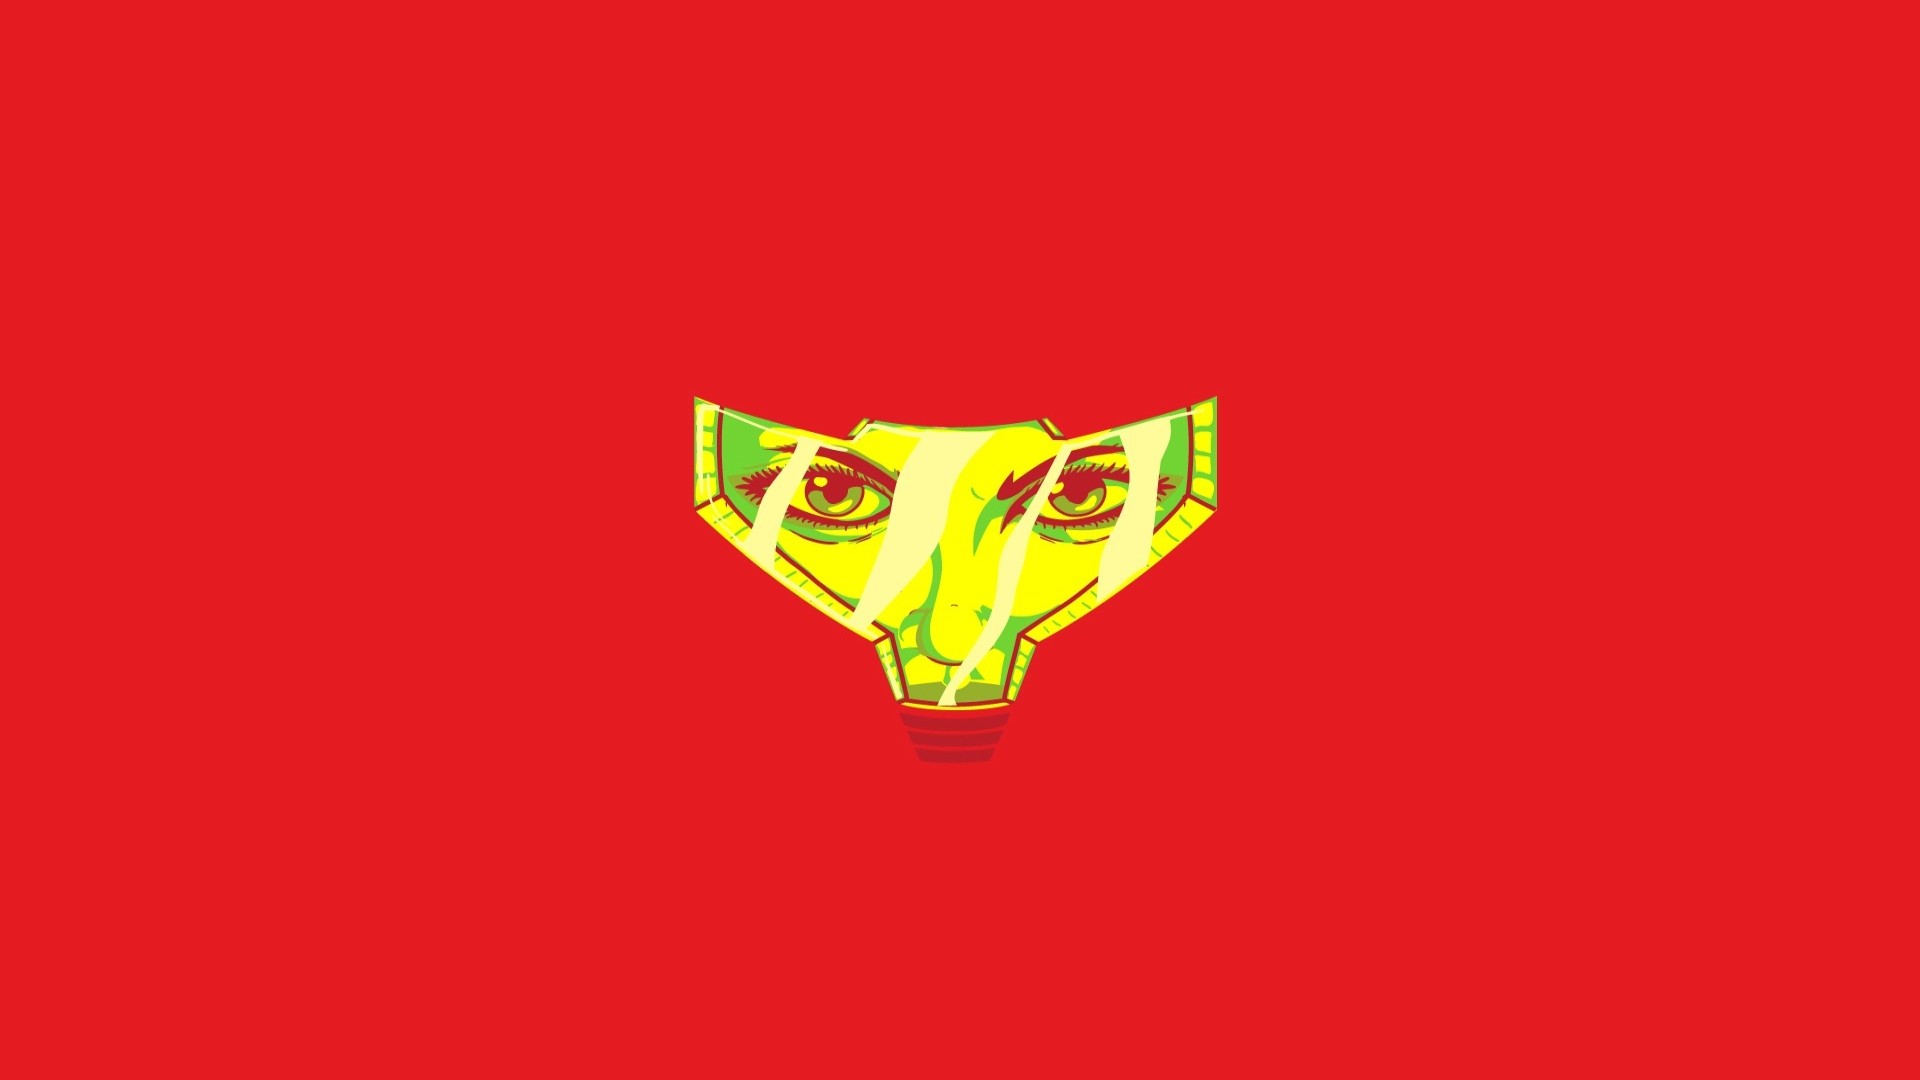 General 1920x1080 red background simple background Samus Aran Video Game Heroes video games video game art video game girls minimalism